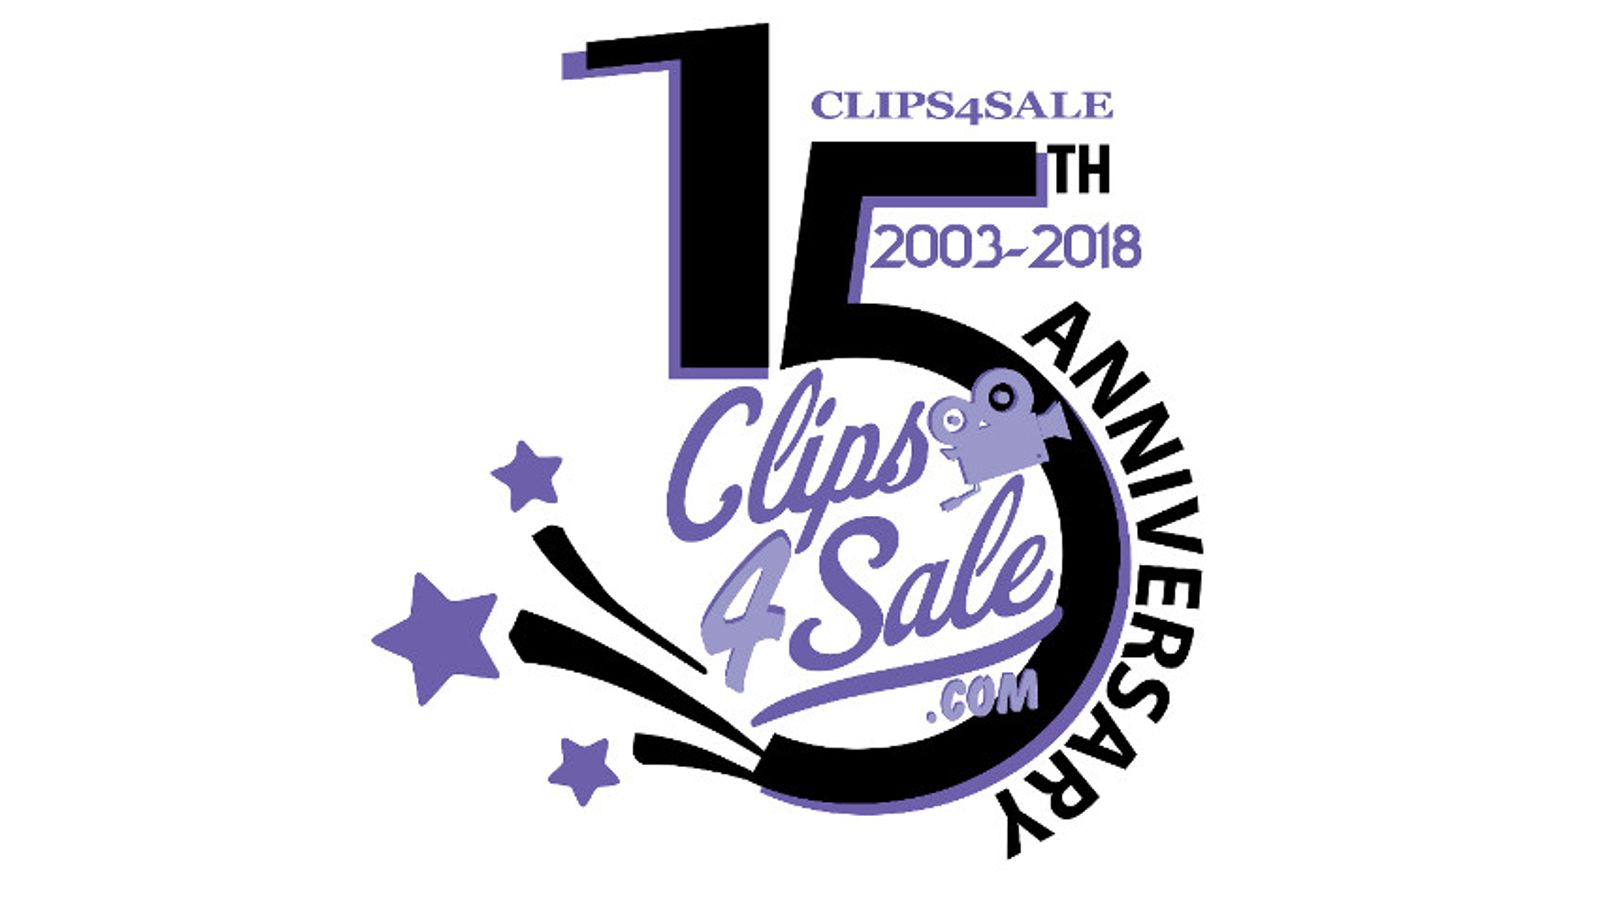 Clips4Sale Reports Hundreds of New Studio Sign-Ups